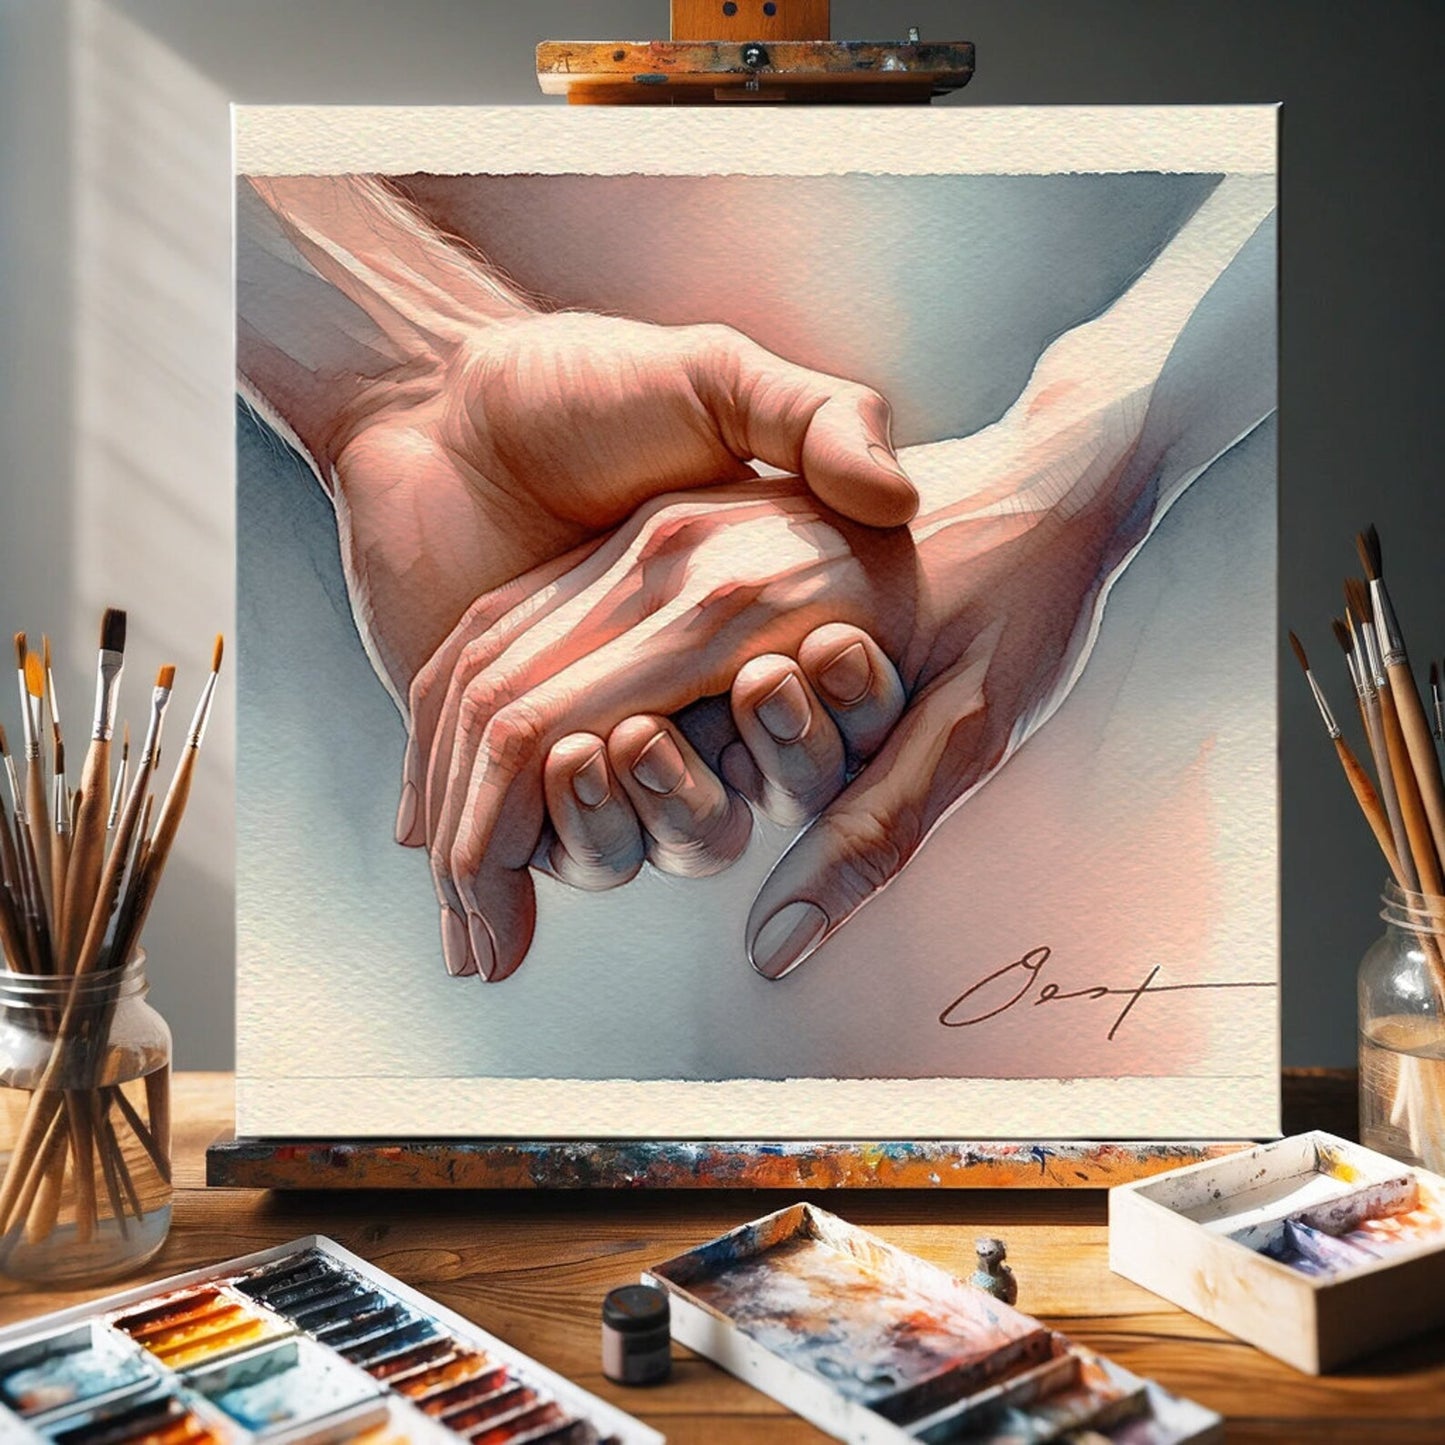 Valentine's Day present “Embrace of Souls” - Watercolor Canvas Print - Romantic Hand-Holding Art - Intimate Couple Gift